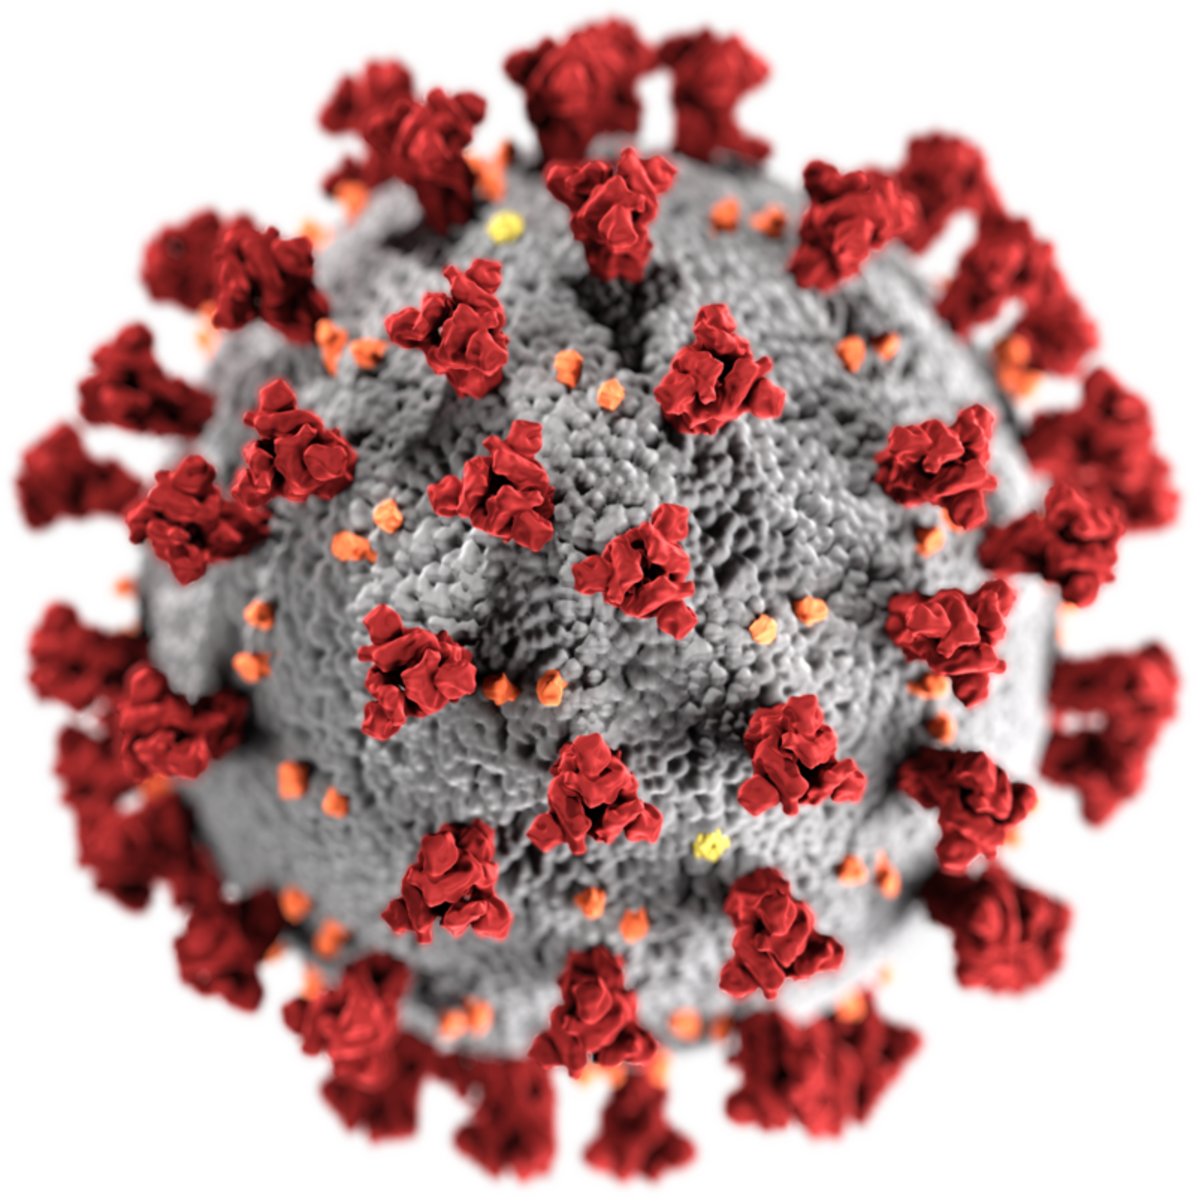 Though aesthetically beautiful, the coronavirus probably won't do pretty things to your lungs if you get it.